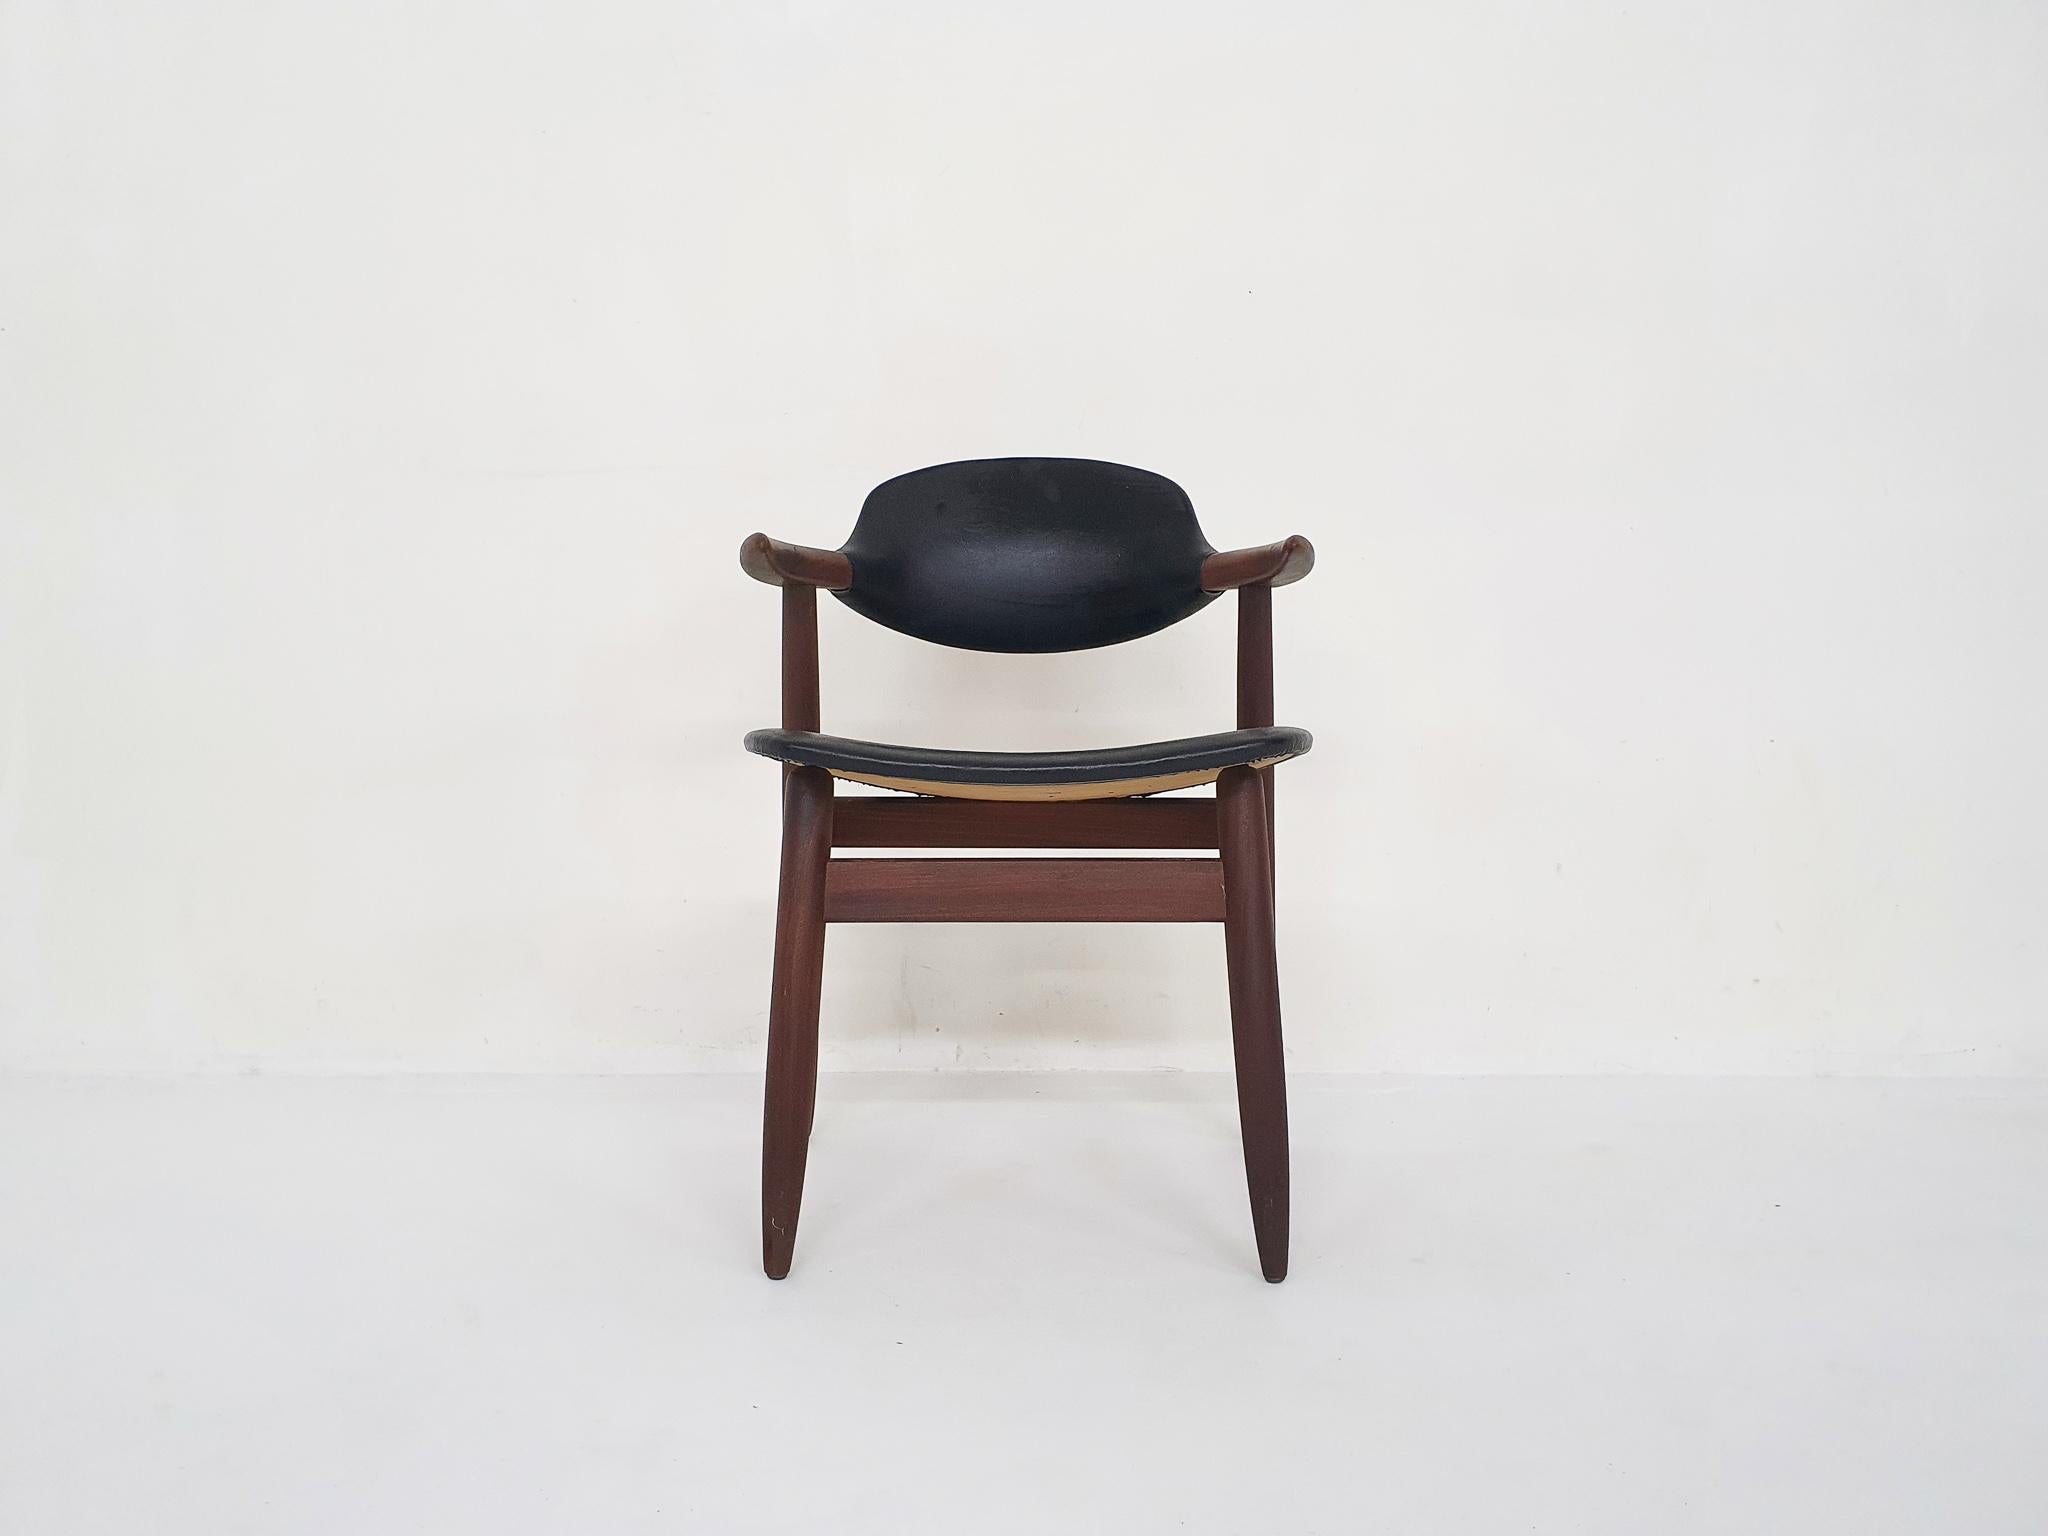 Teak dining chair with black vinyl upholstery. In good original condition.